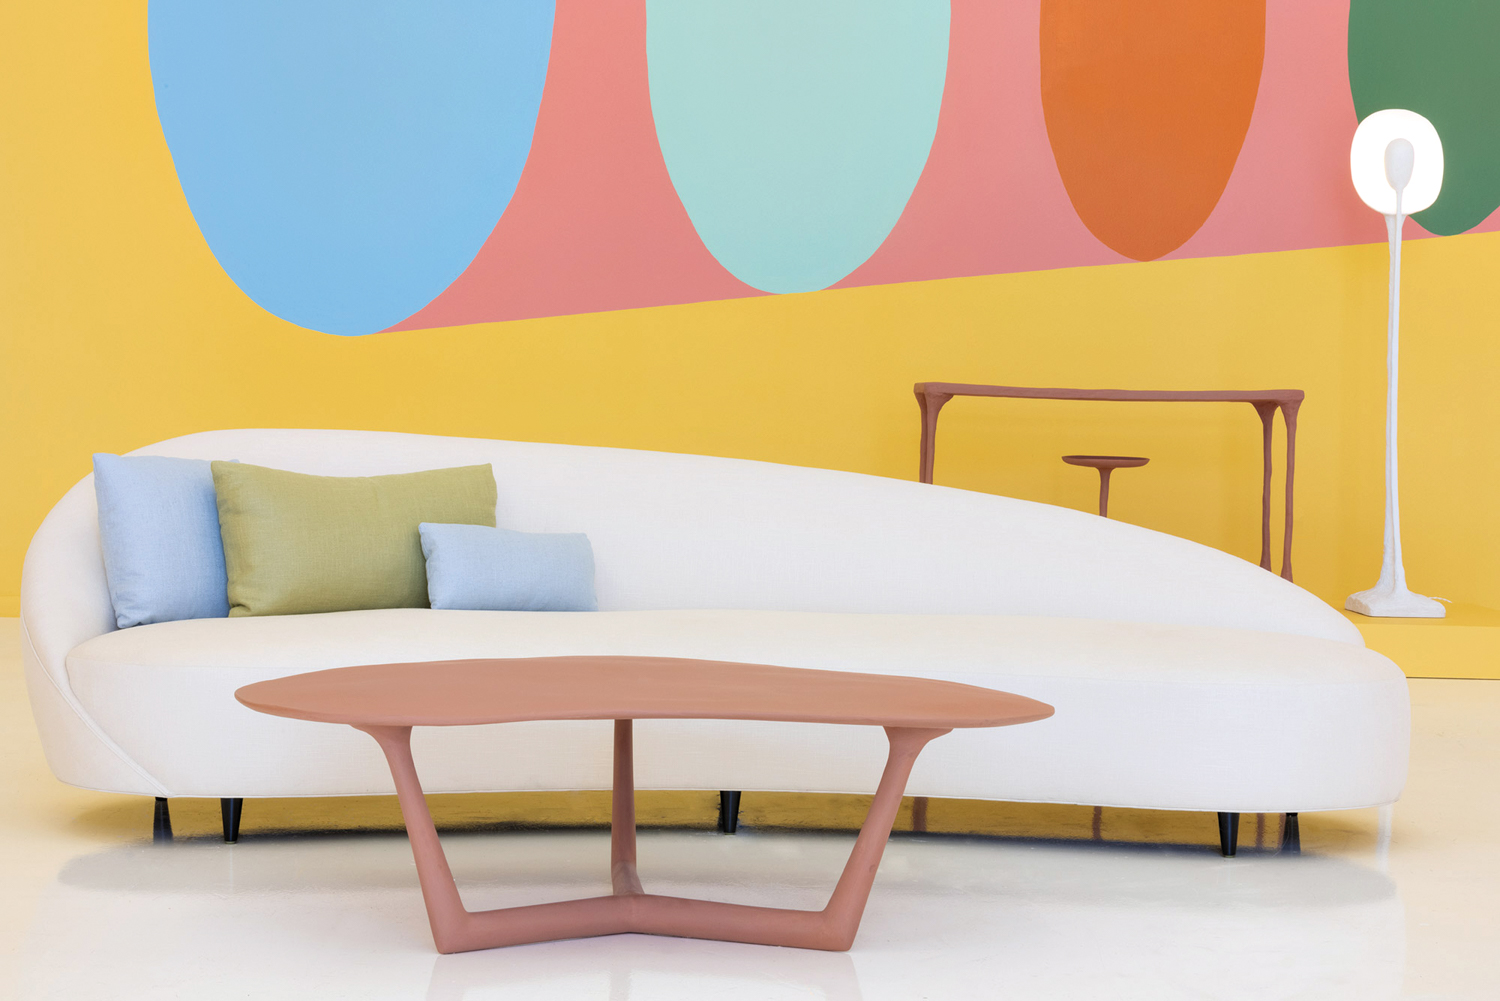 Colorful wallcovering, white curved sofa and sculptural coffee table